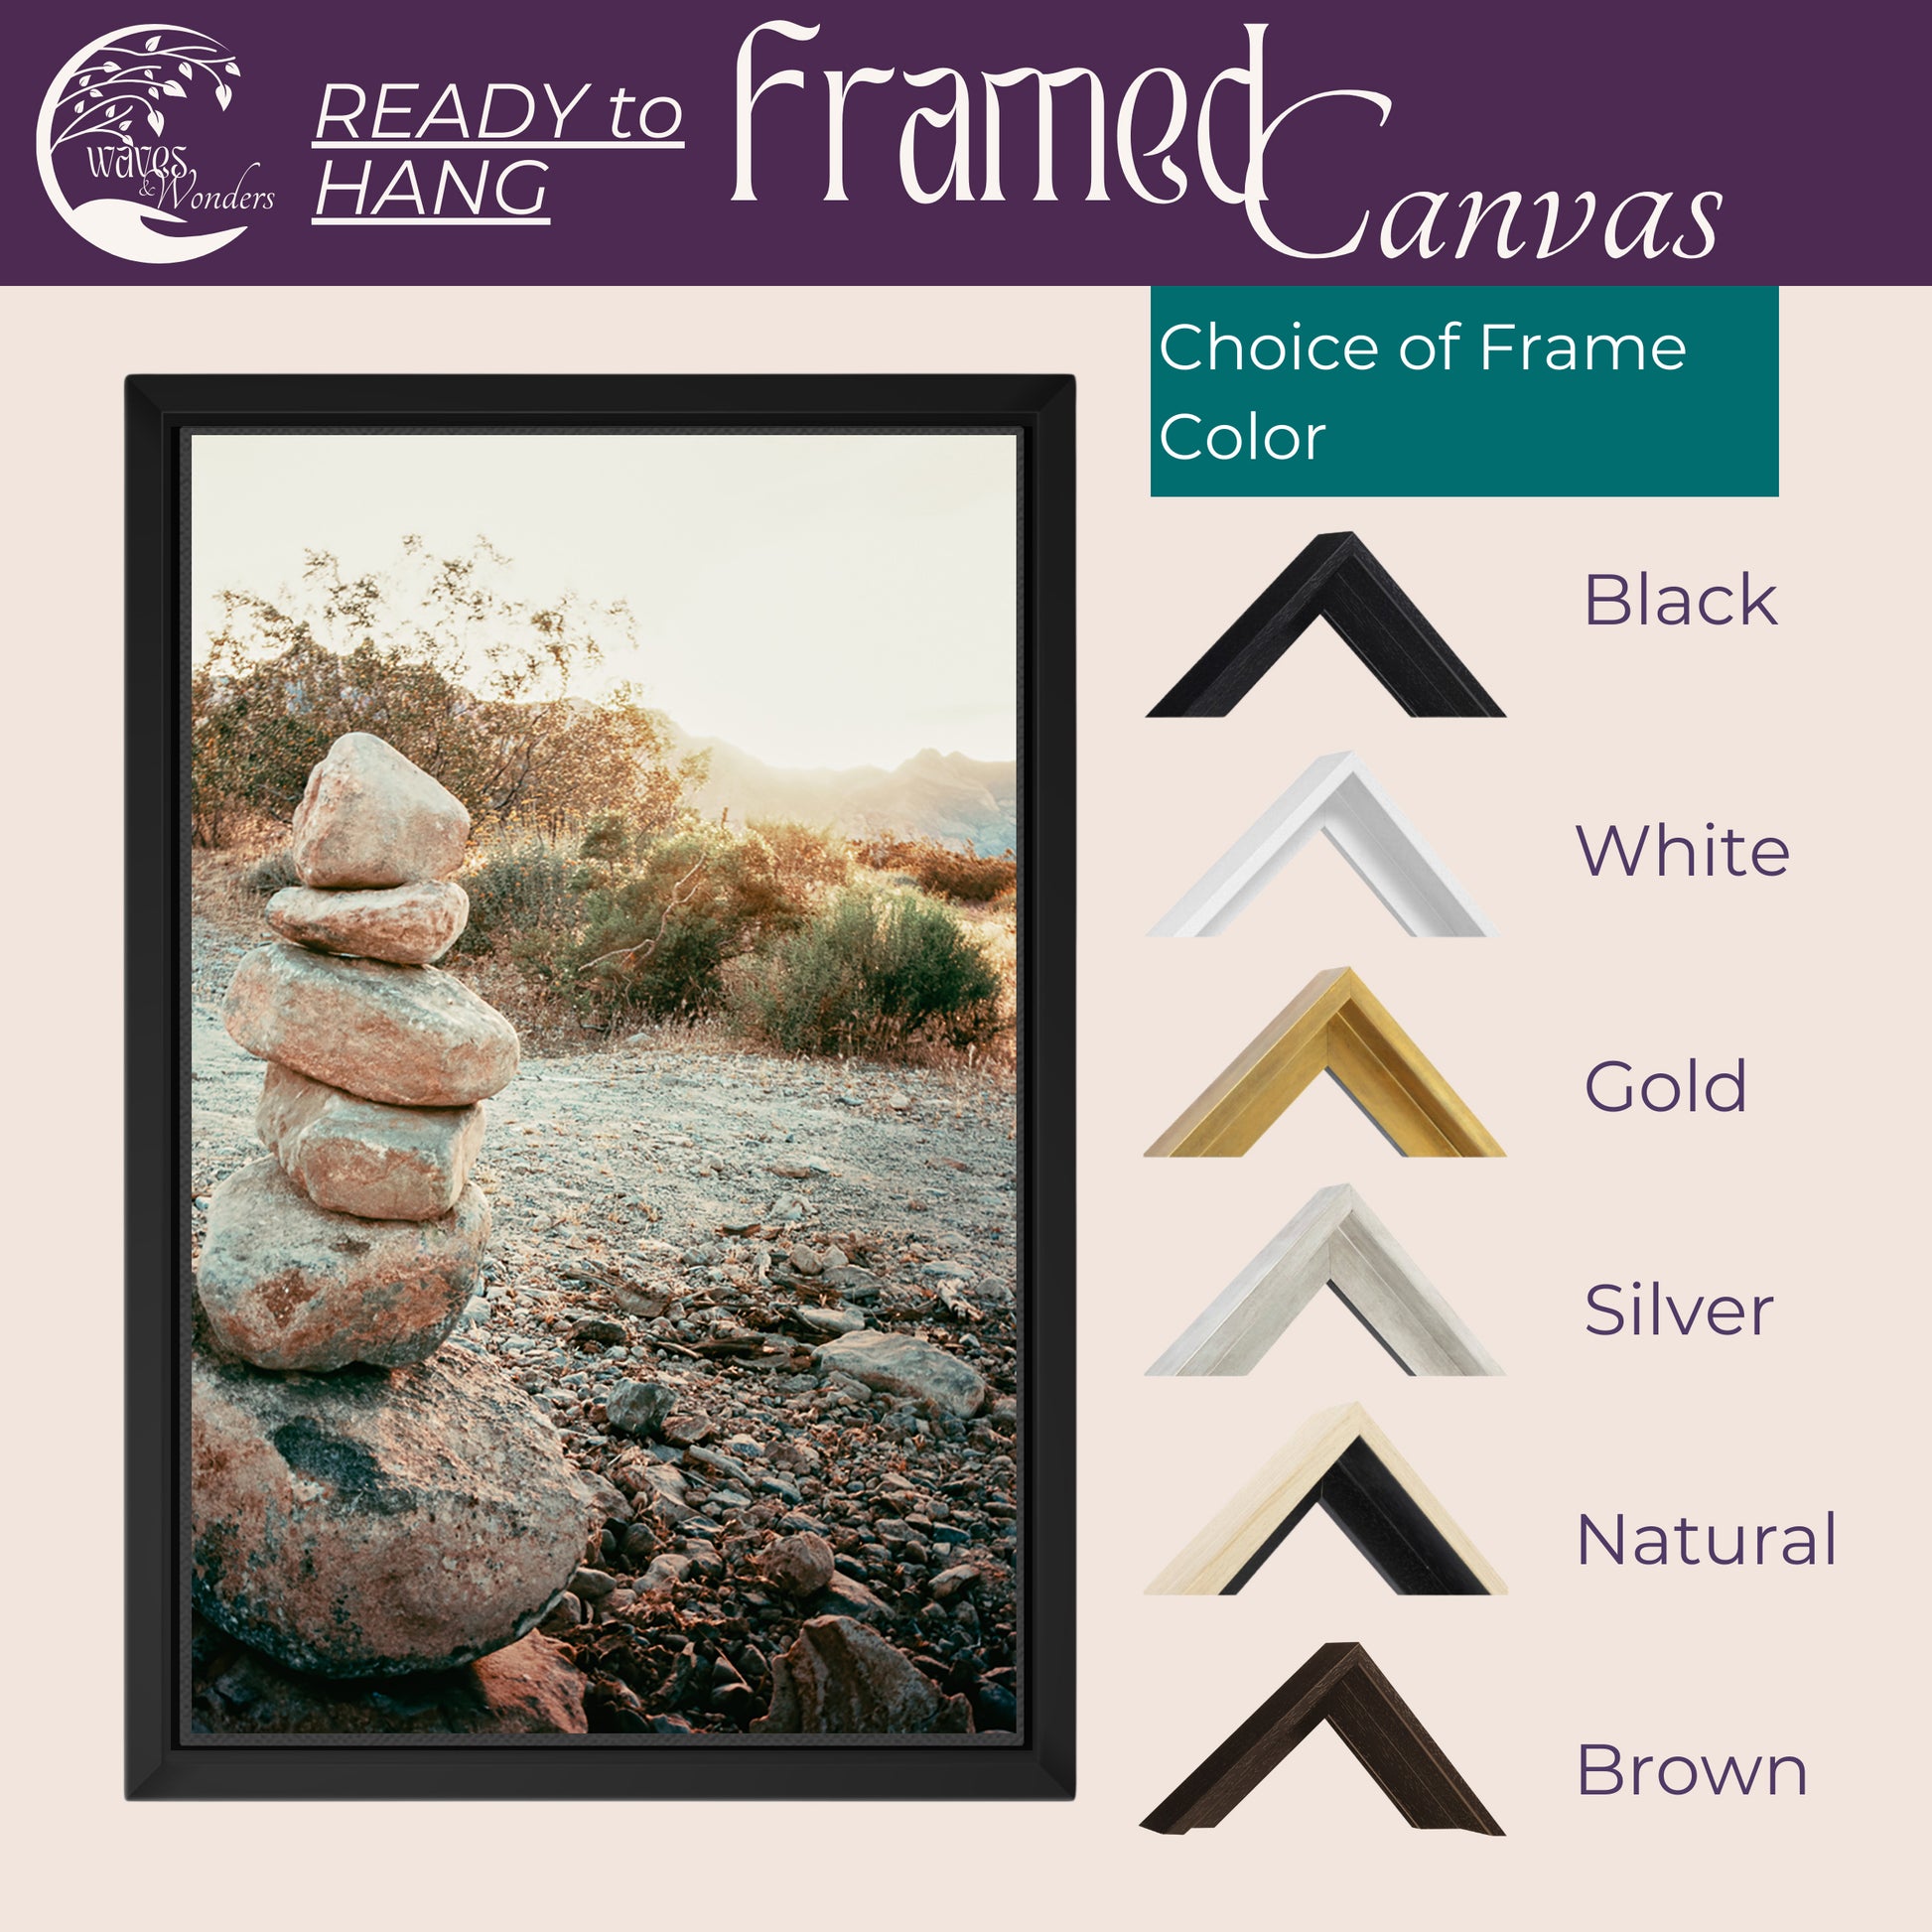 a picture of a frame with a picture of some rocks